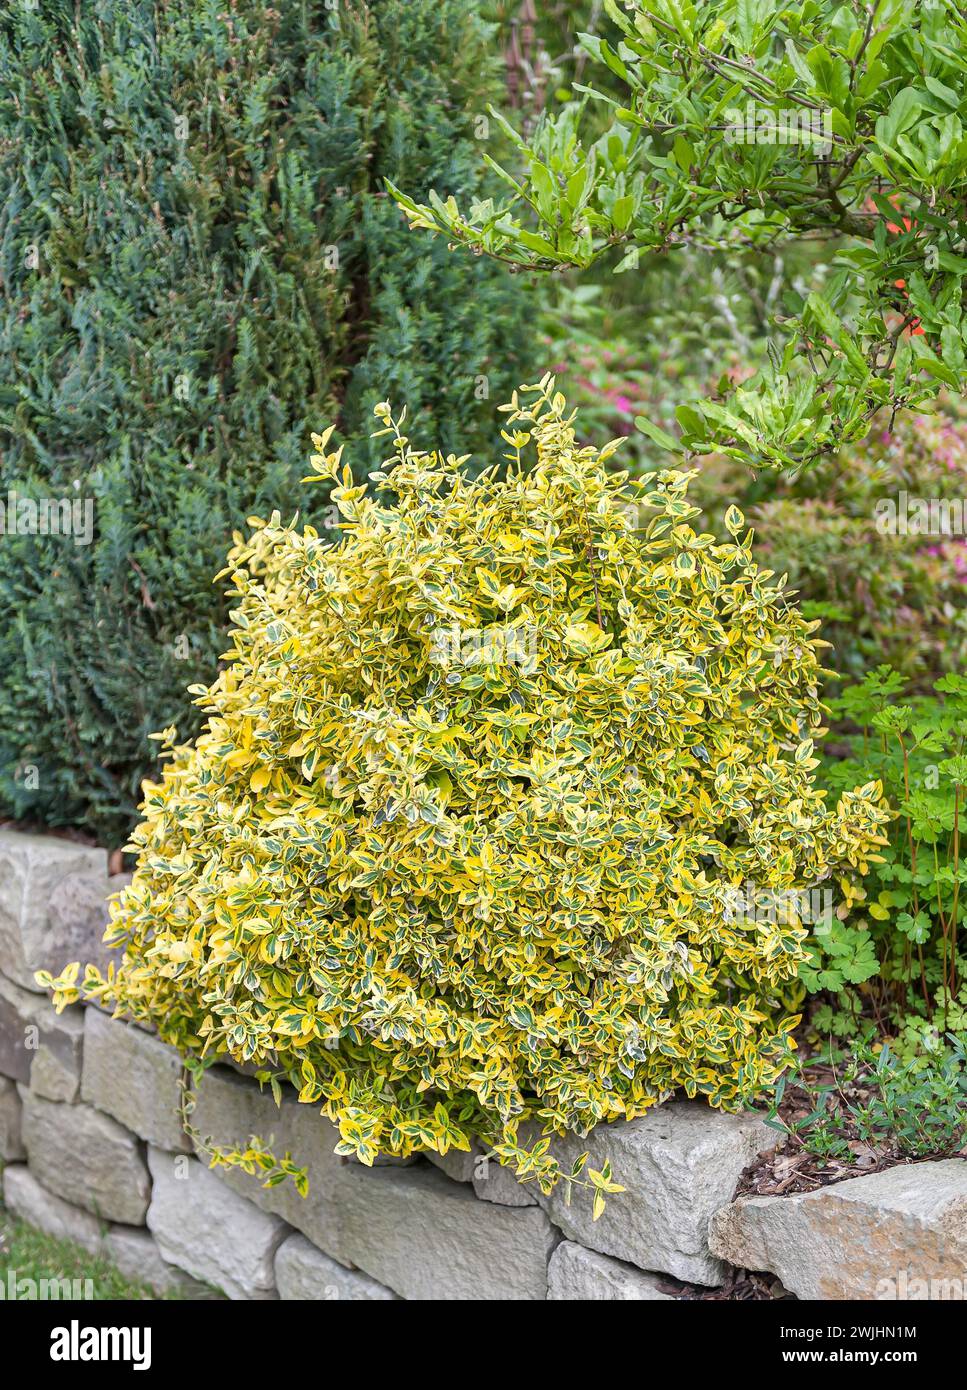 Evergreen spindle bush (Euonymus fortunei 'Emerald 'n' Gold') Stock Photo